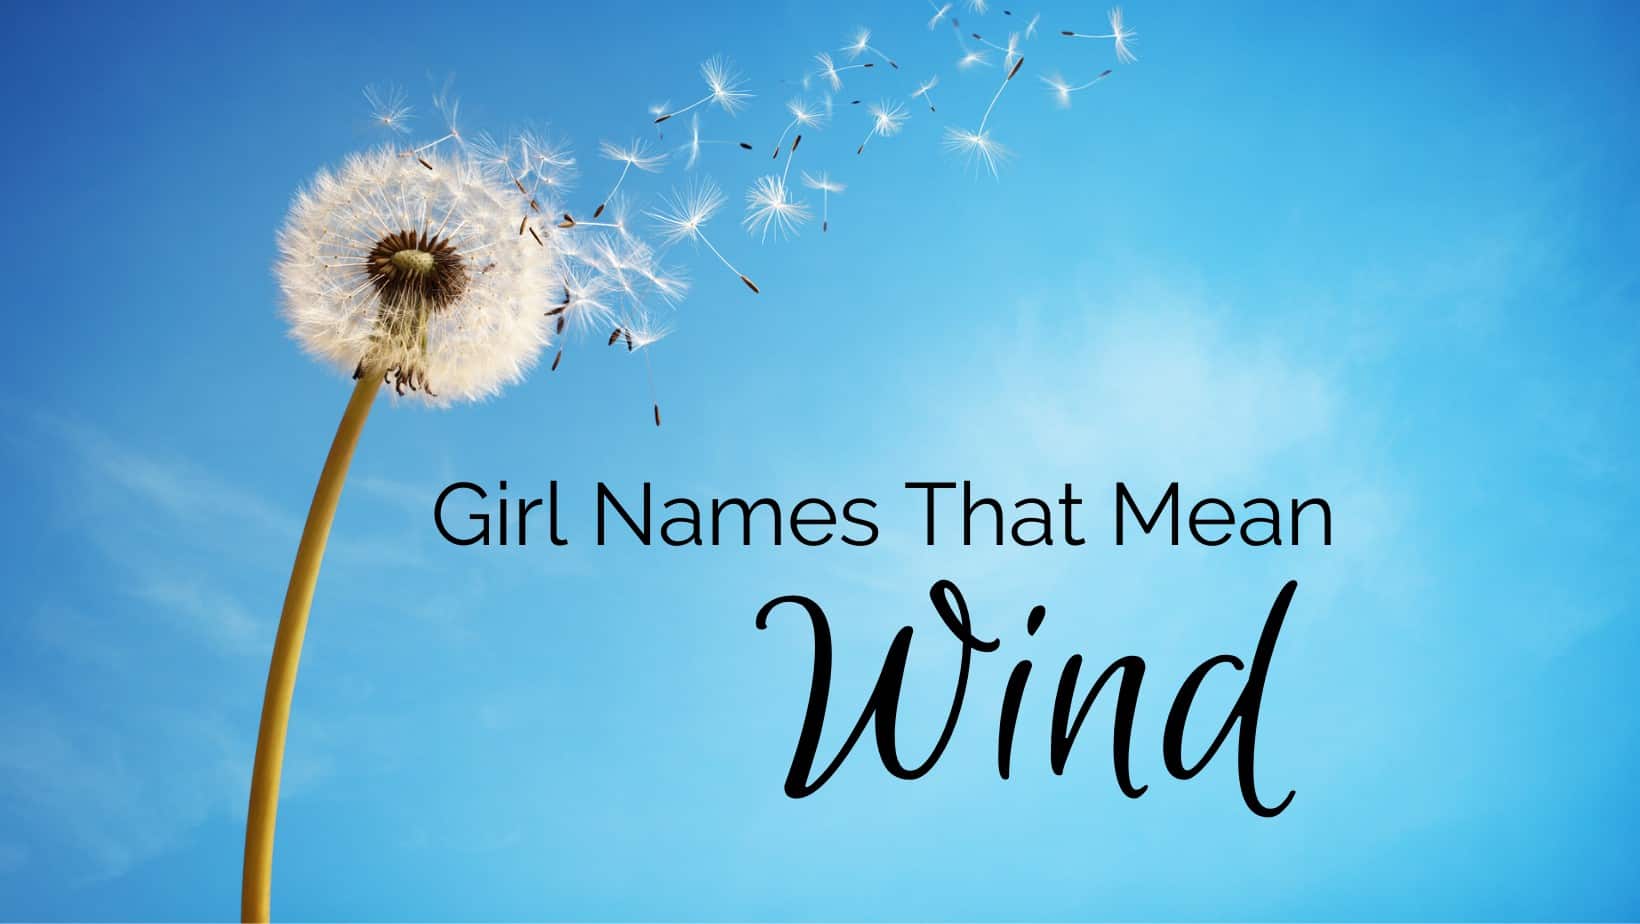 Girl Names That Mean Wind